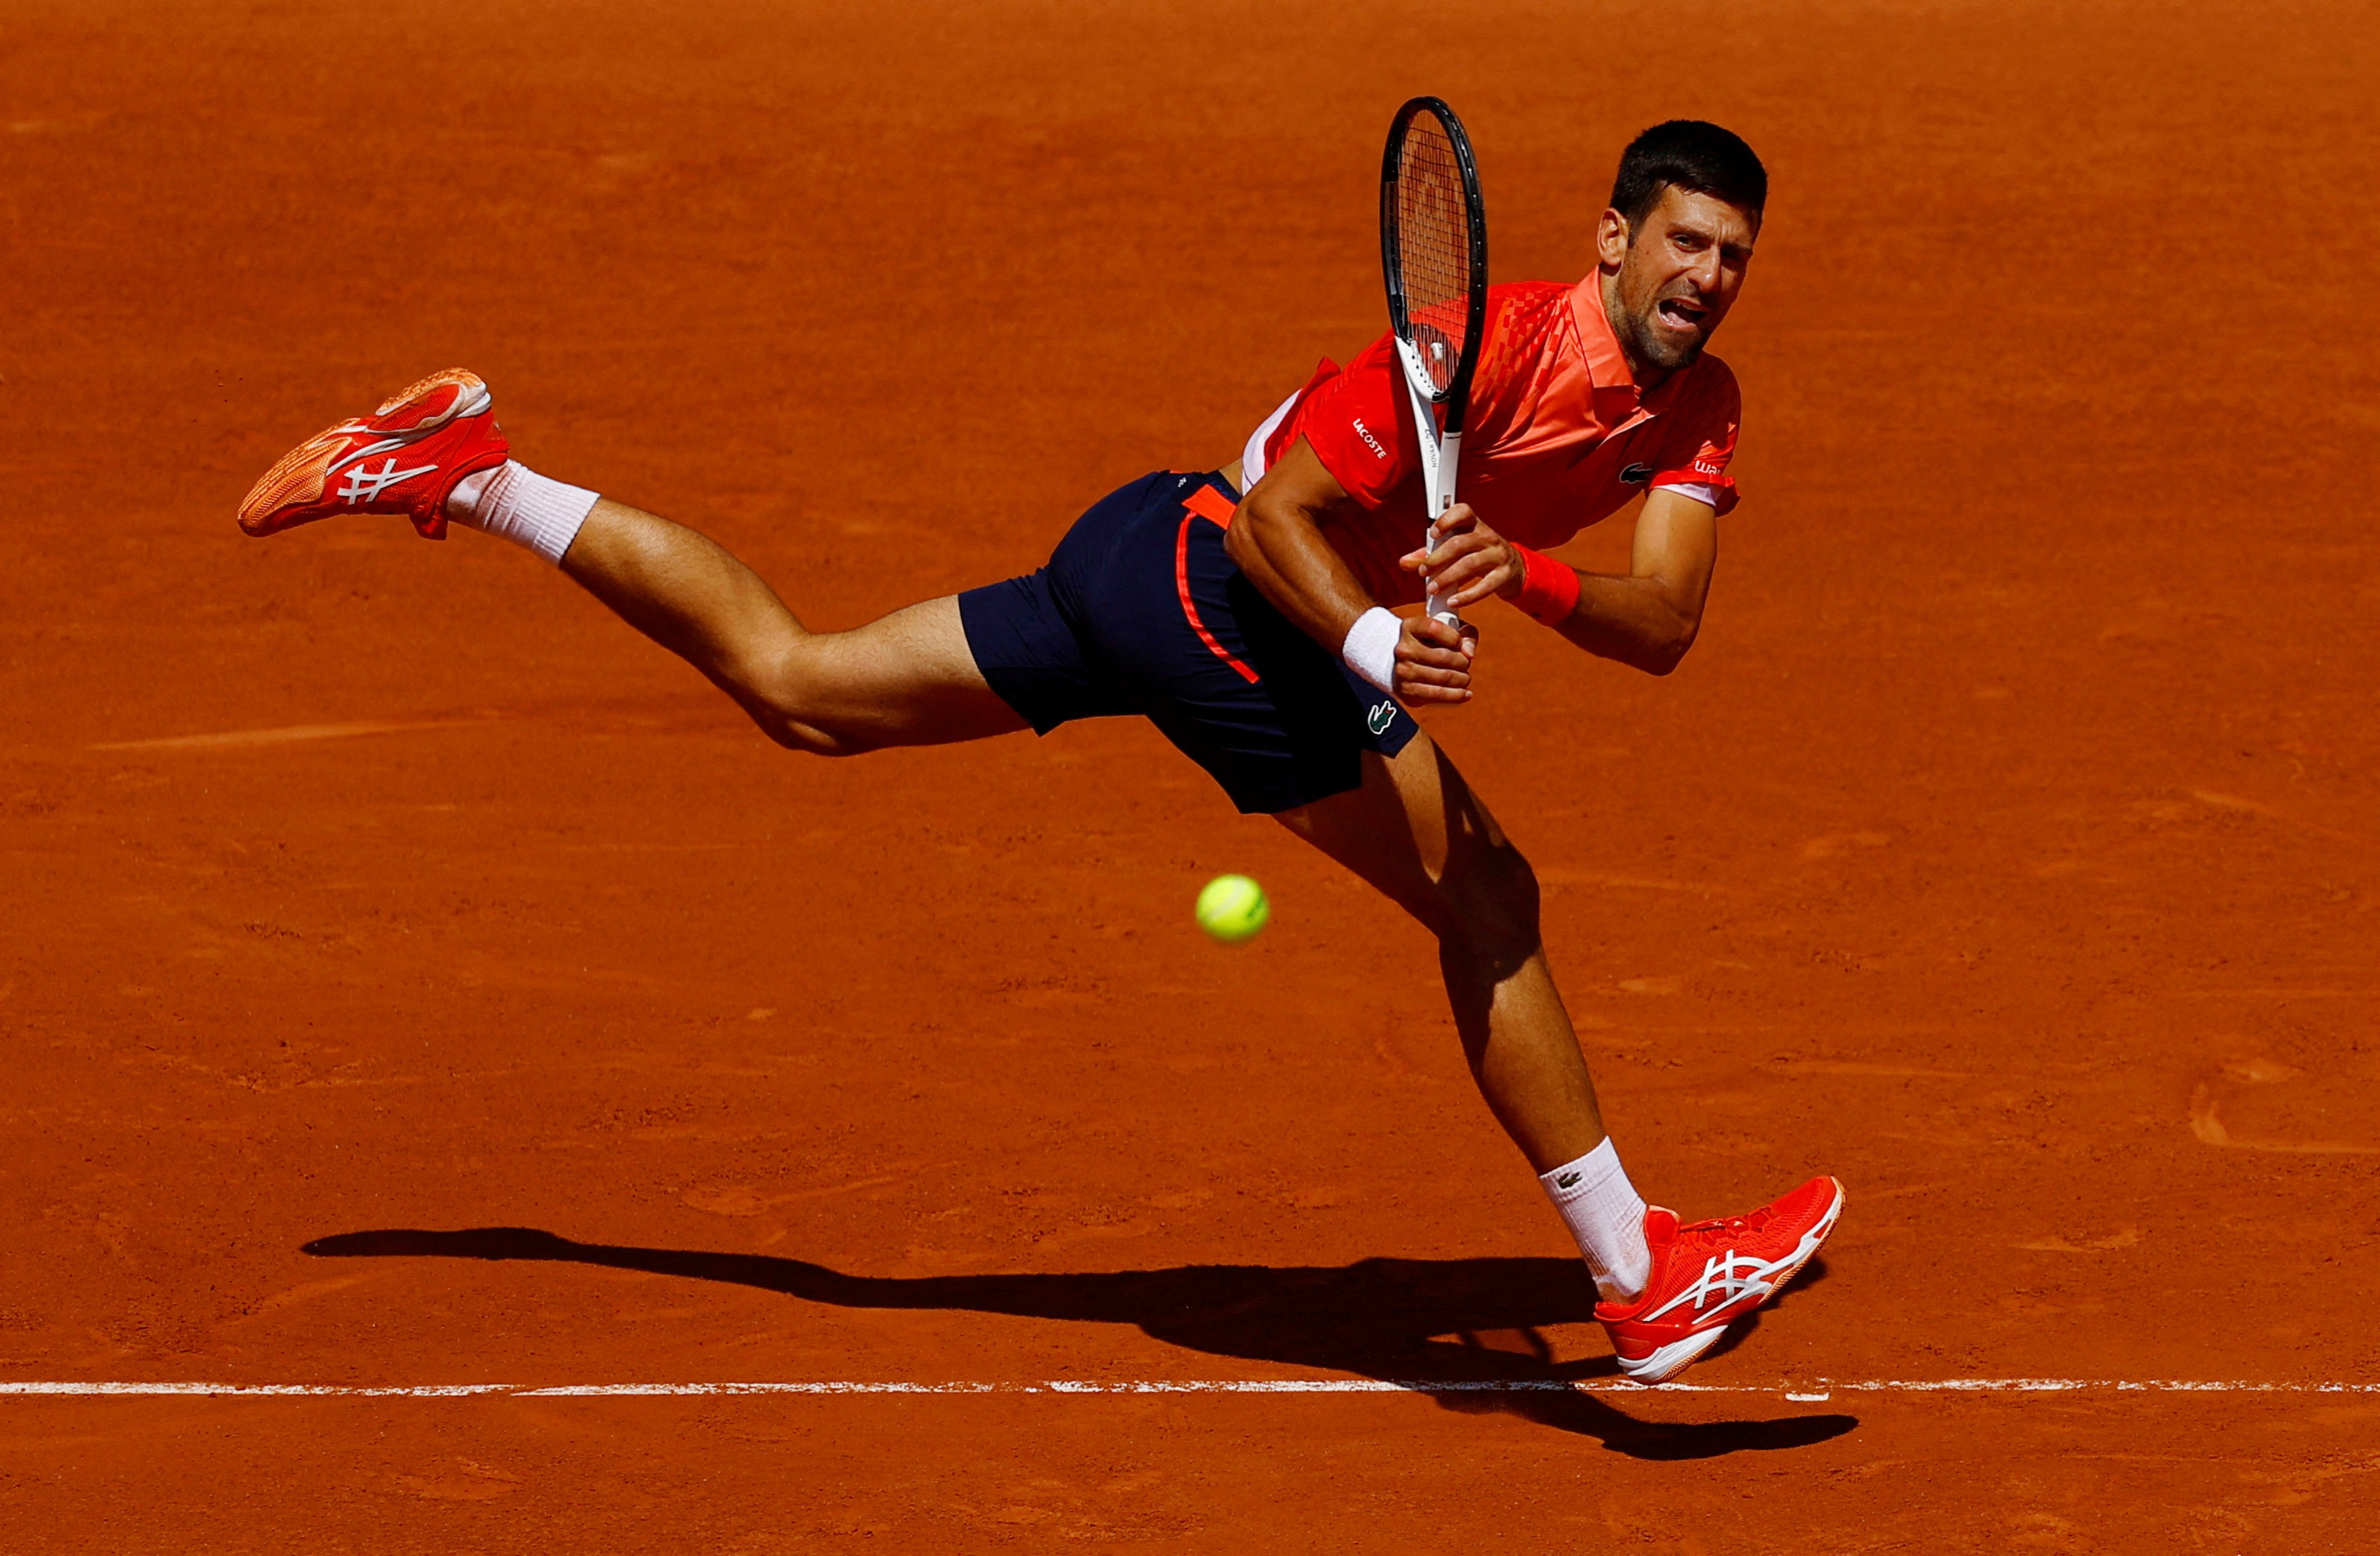 Es fugl Parcel Djokovic cruises at French Open, risks controversy with Kosovo message |  Reuters